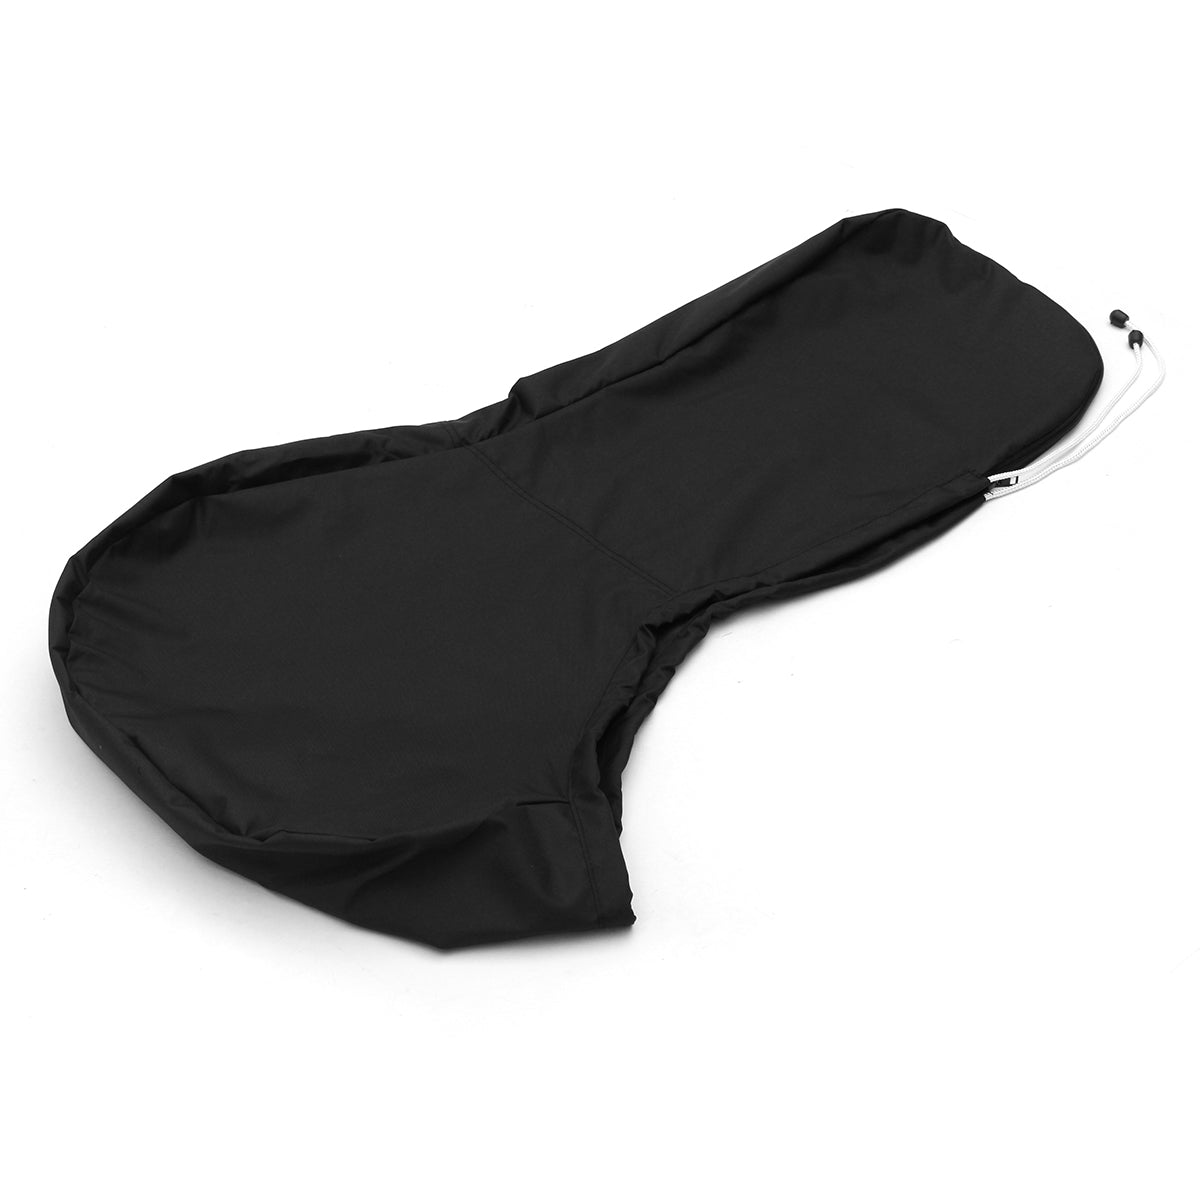 Dark Slate Gray 600D Black Boat Full Outboard Engine Cover Fits For 6 To 15HP Motor Waterproof